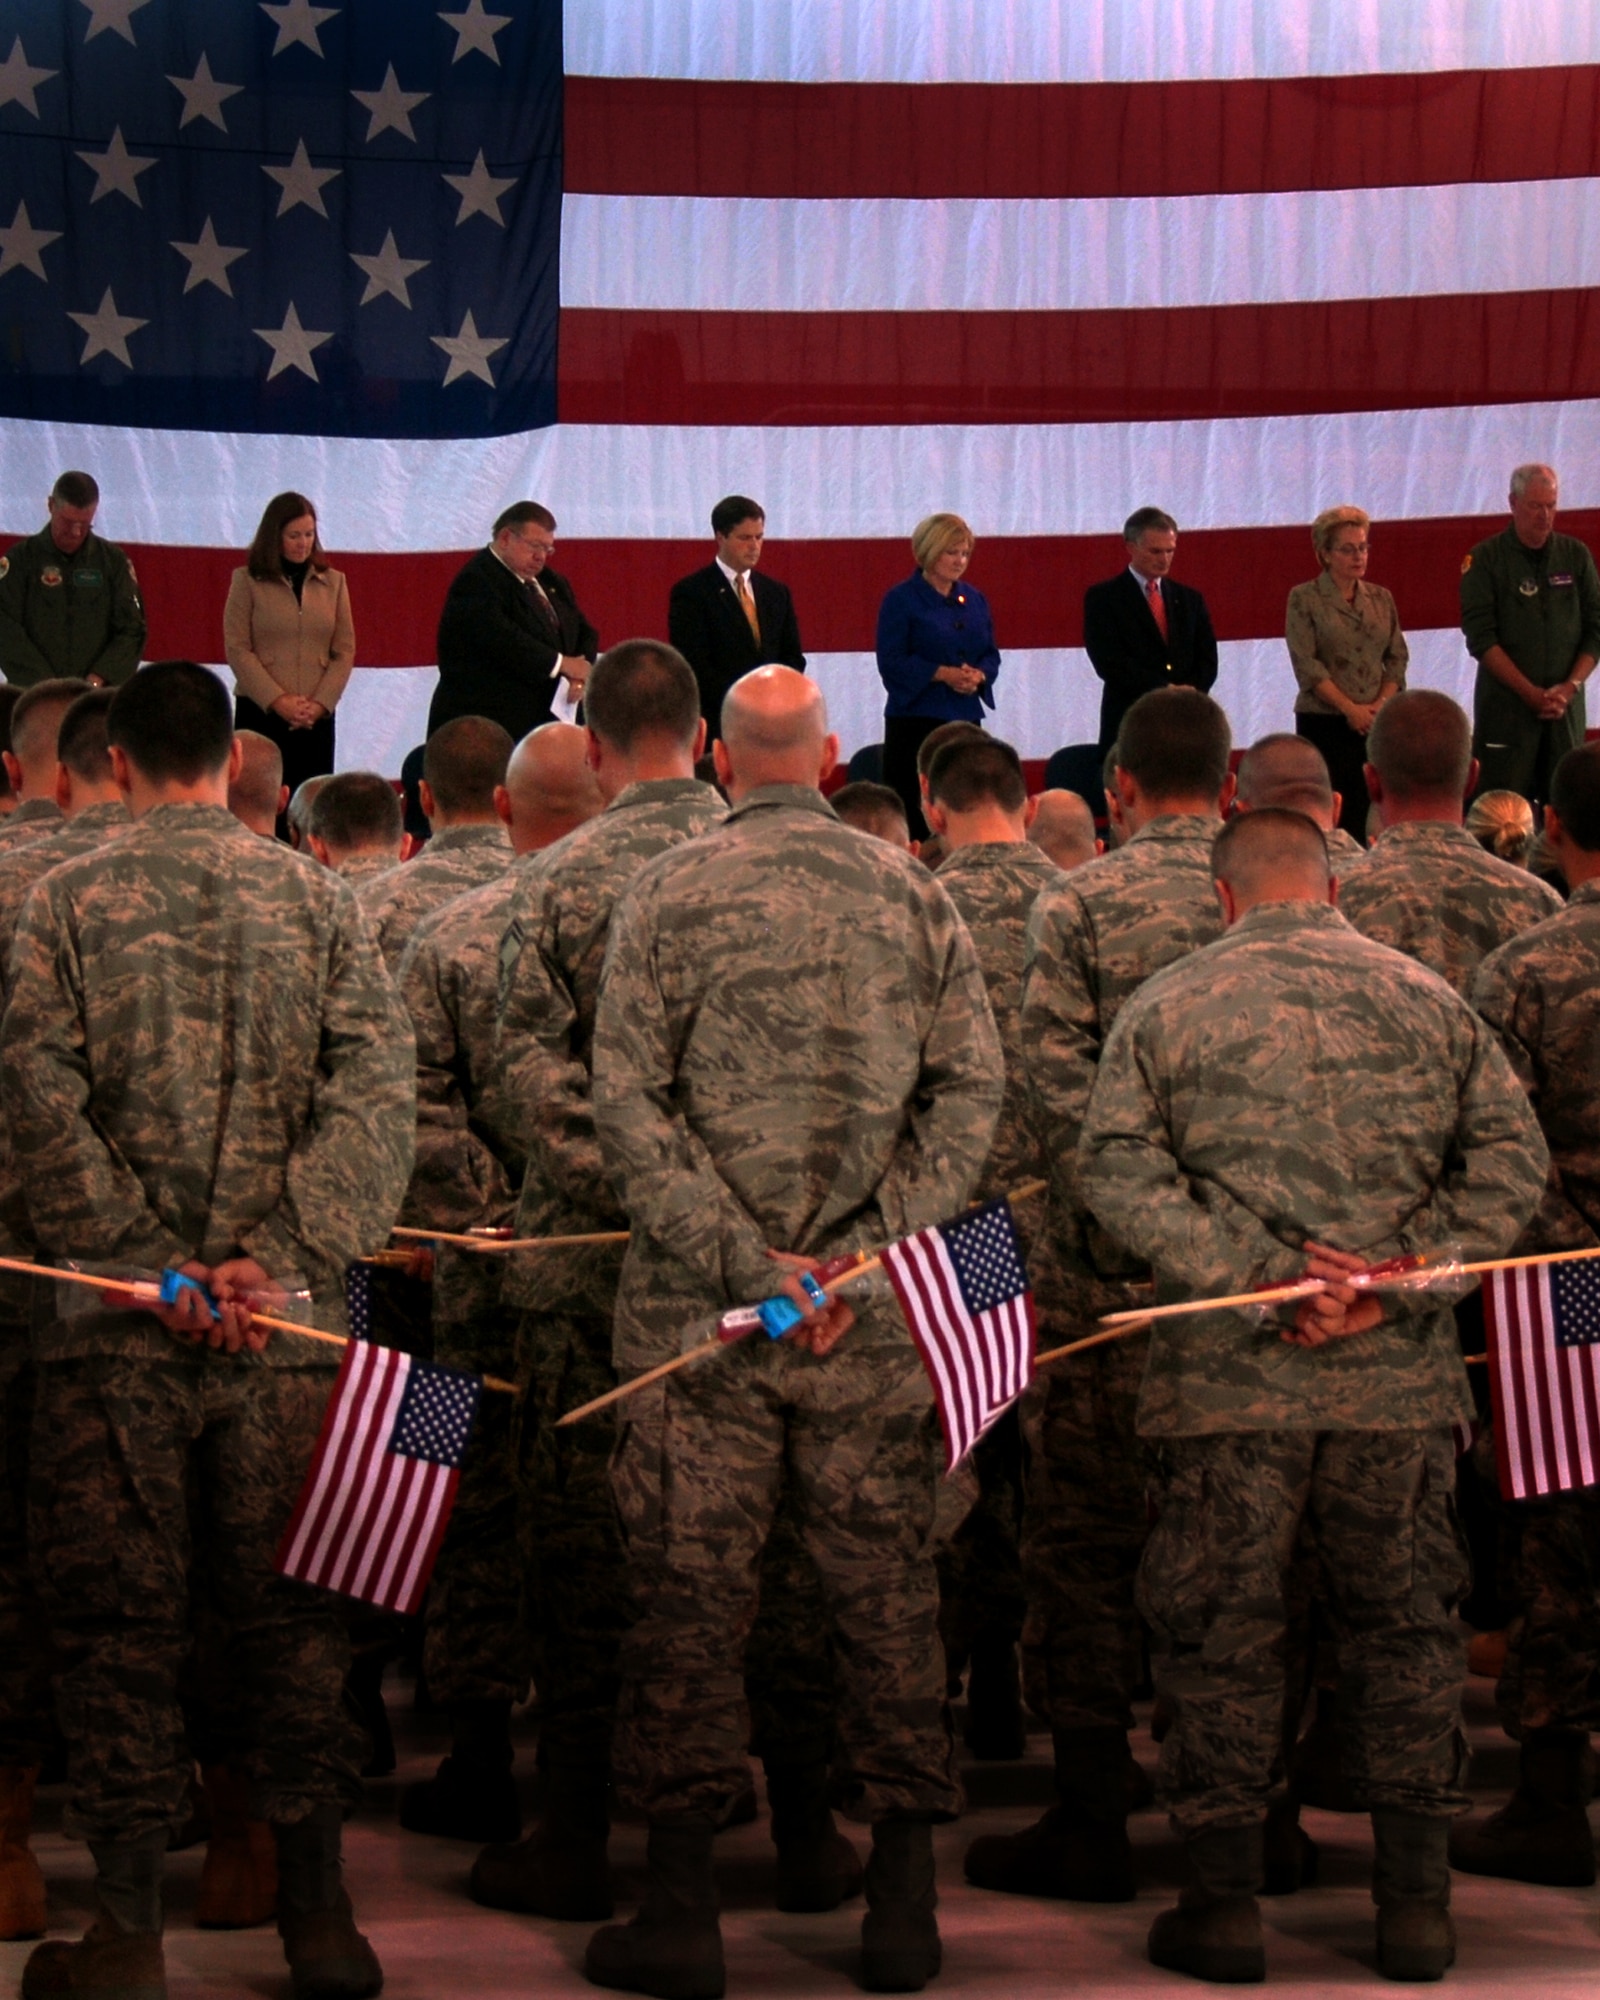 Members of the 180th Fighter Wing and distinguished guests bow their heads in prayer at the send-off ceremony October 5, 2008 to honor our servicemembers for thier upcoming deployment in support of Operation Enduring Freedom and Operation Iraqi Freedom. Photo by Airman First Class Amber Williams